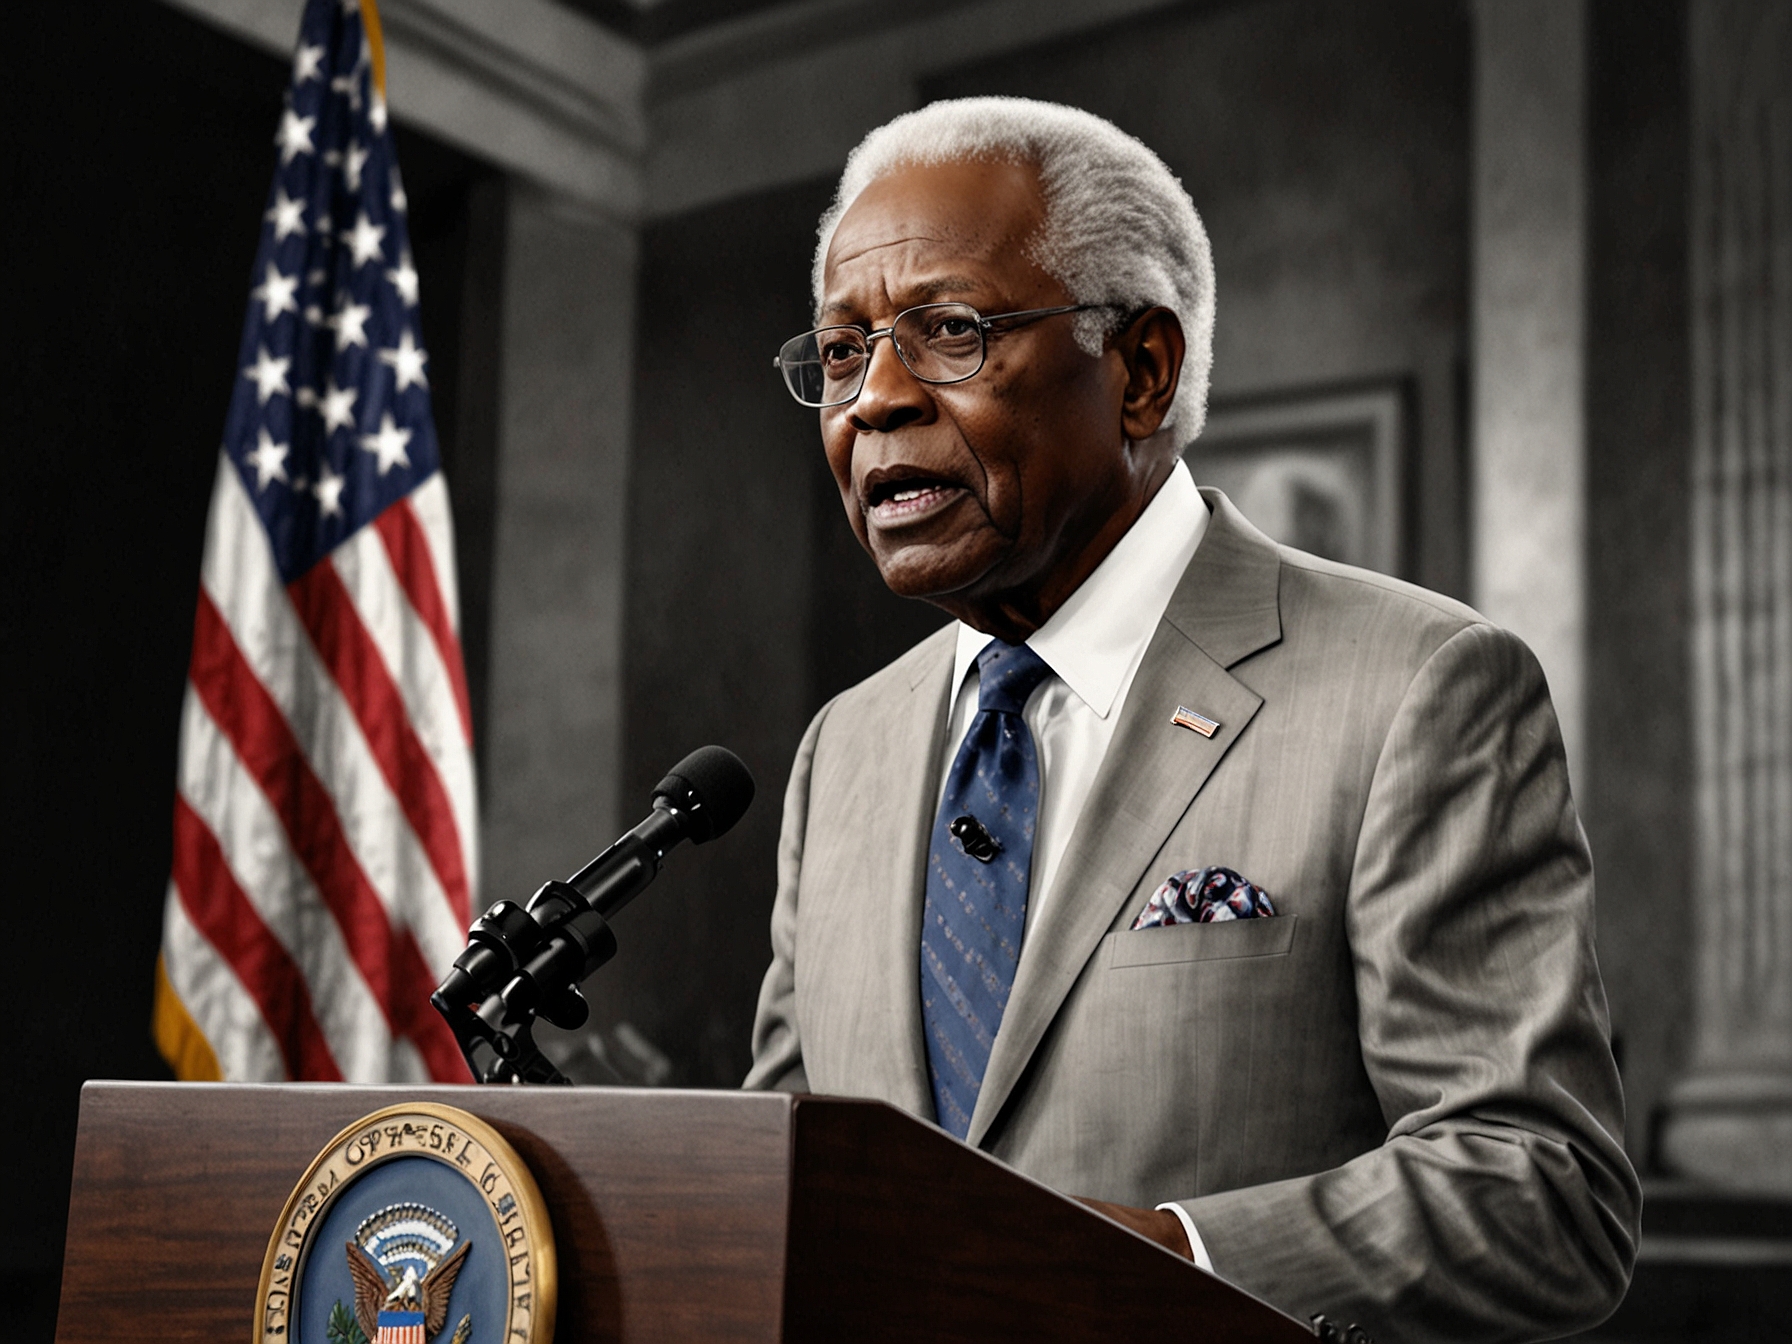 An image showing Rep. James E. Clyburn addressing the media, emphasizing his support for President Biden and underscoring the importance of party unity and stability in the upcoming election.